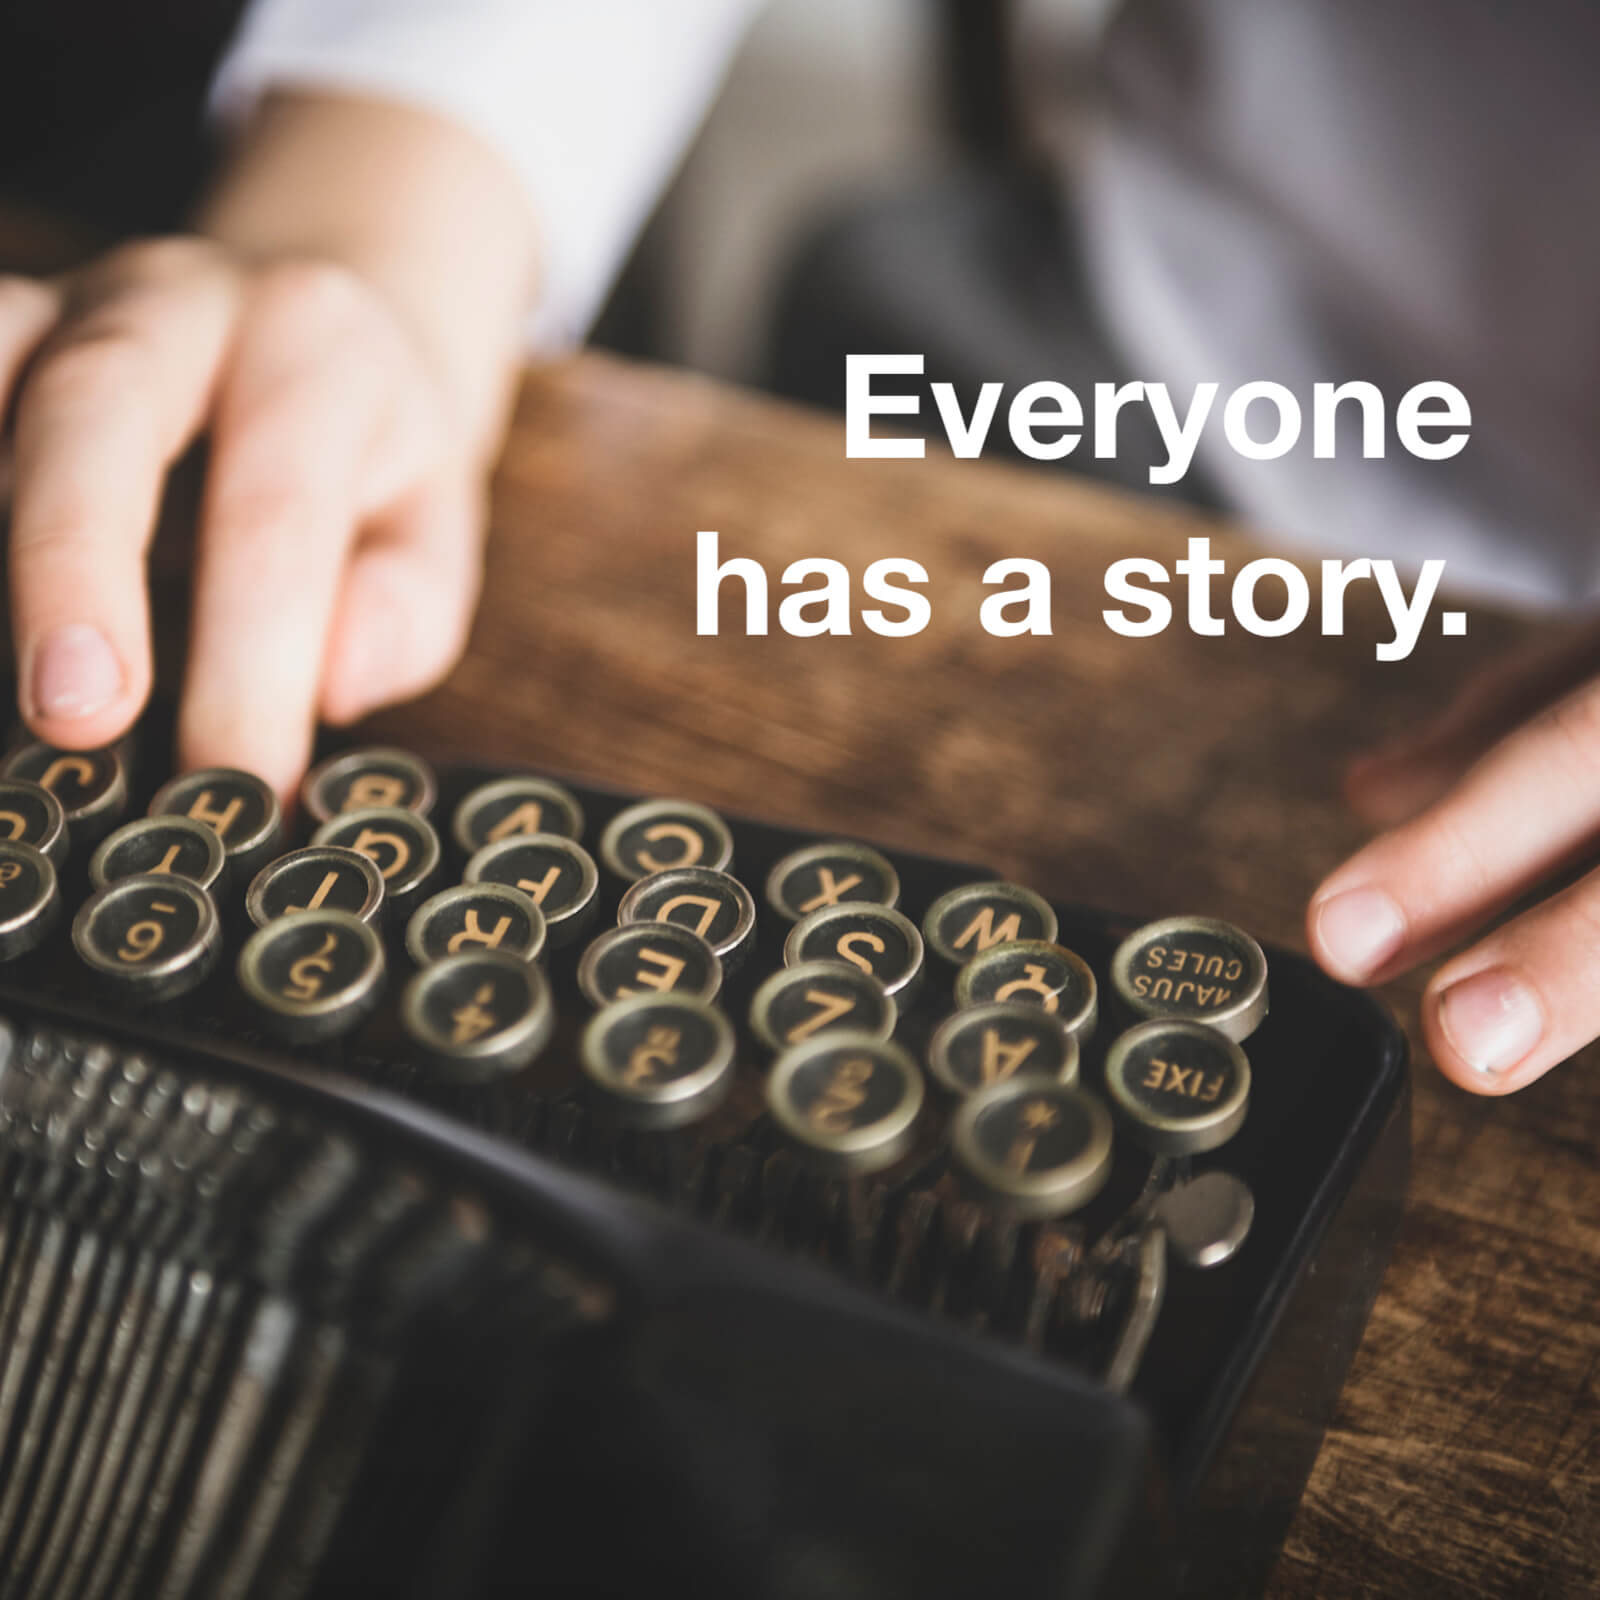 Everyone has a story - Stellengesuch Nanny formulieren